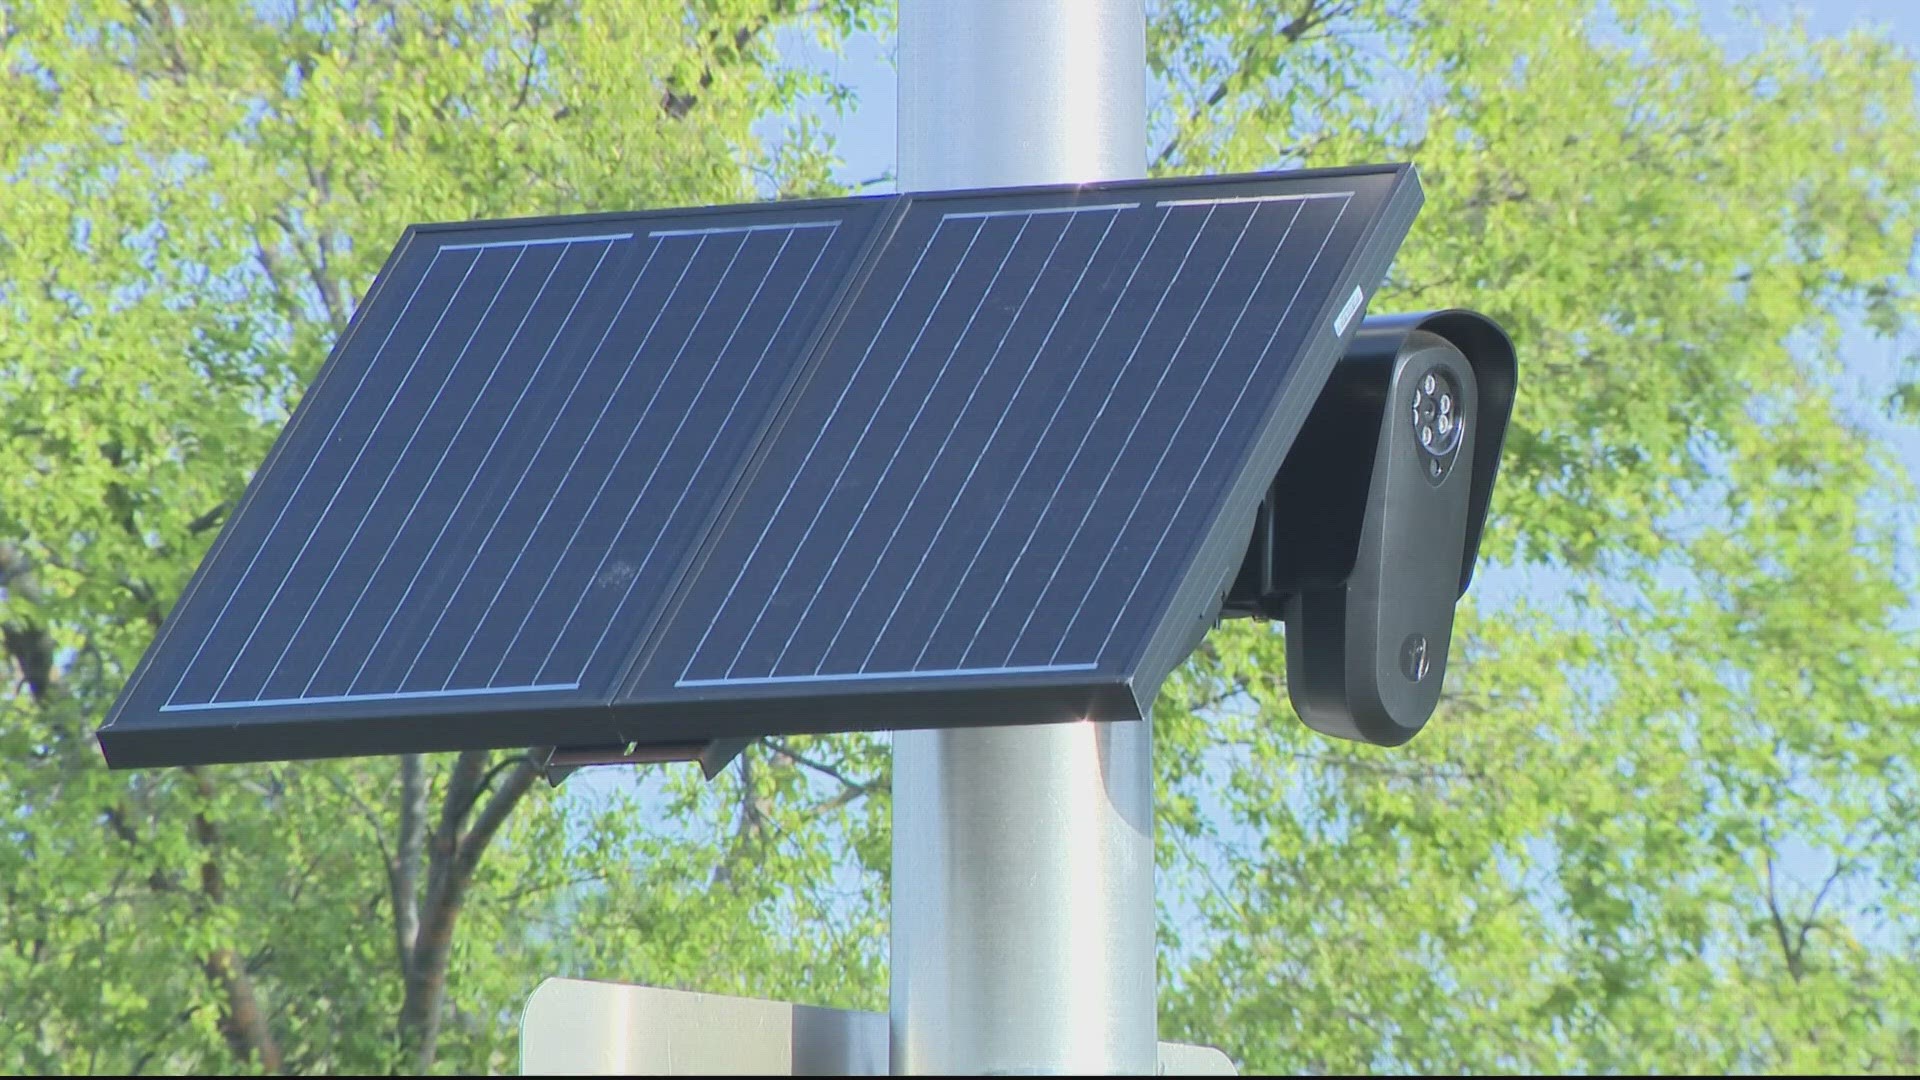 Alexandria Police say this new technology is helping them battle an increase in recent crime in the city.